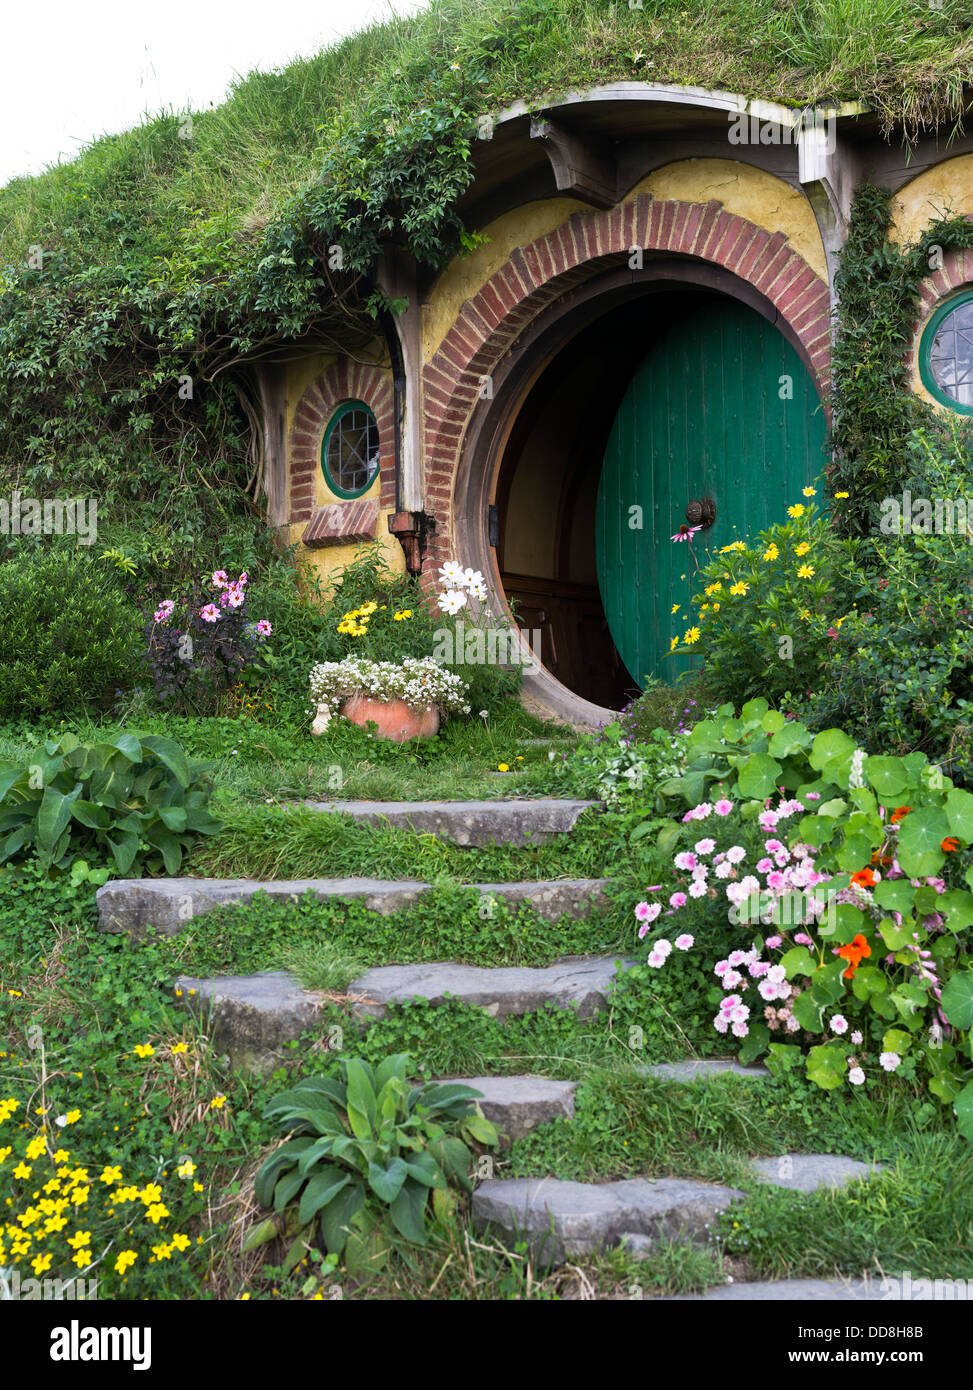 dh Hobbits cottage door HOBBITON NEW ZEALAND Garden film set movie site Lord of the Rings films location hobbit house Stock Photo